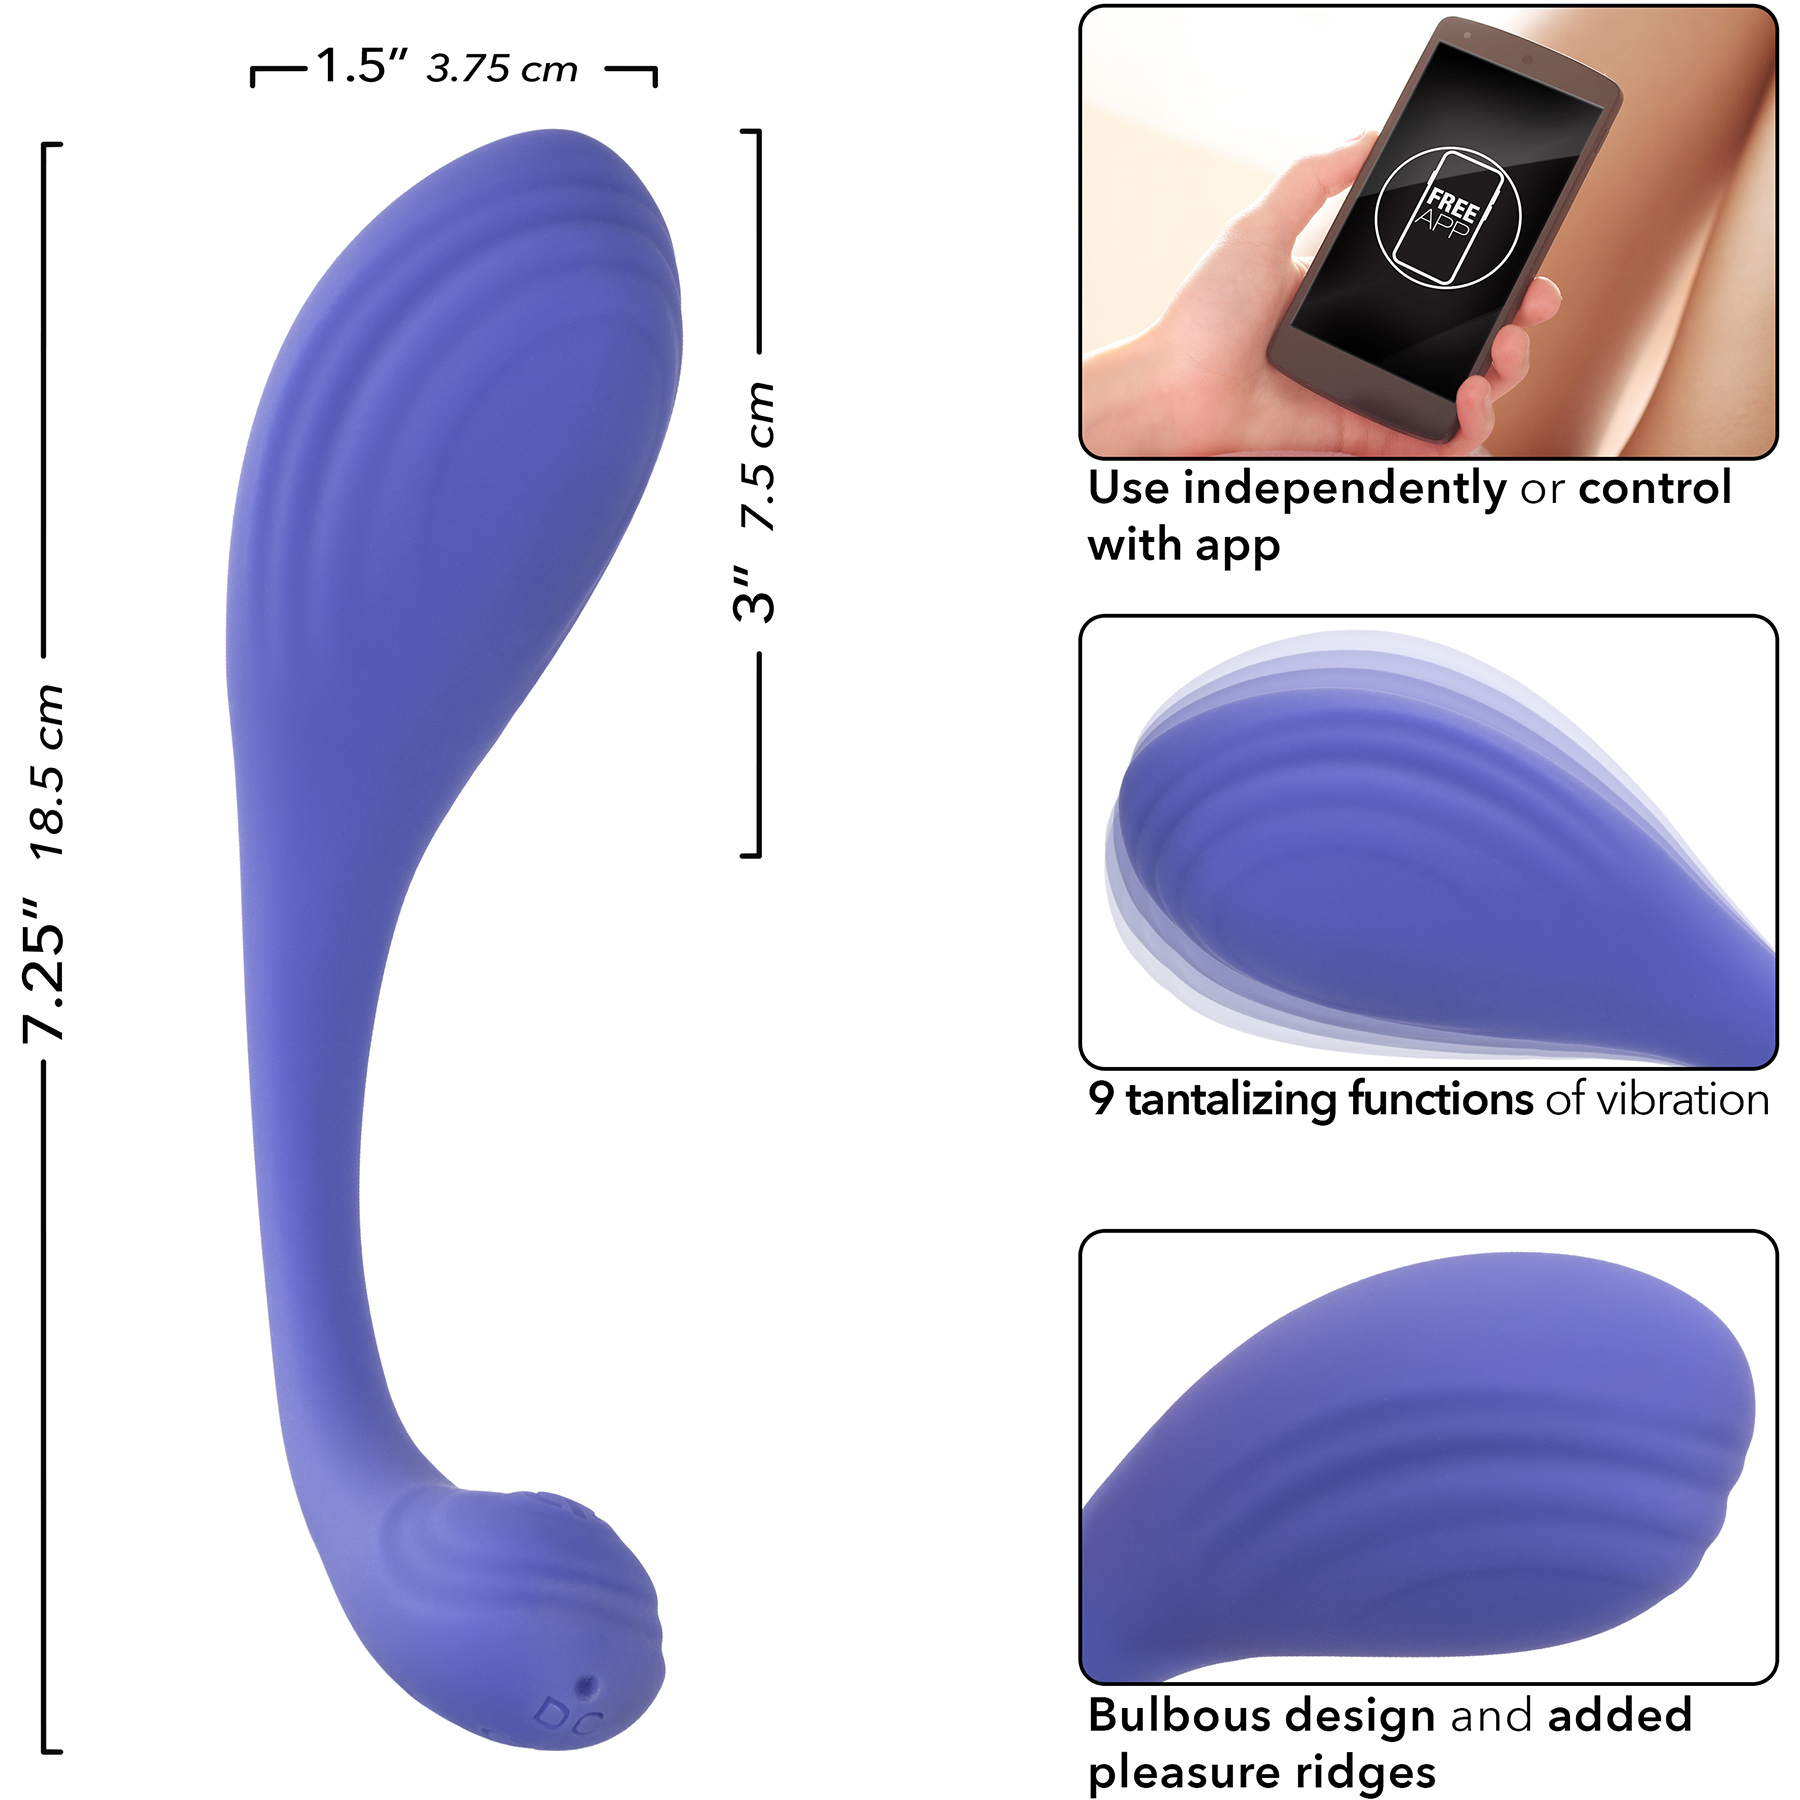 Connect Kegel Exerciser Rechargeable Waterproof Silicone App Enabled Vibrator - Measurements